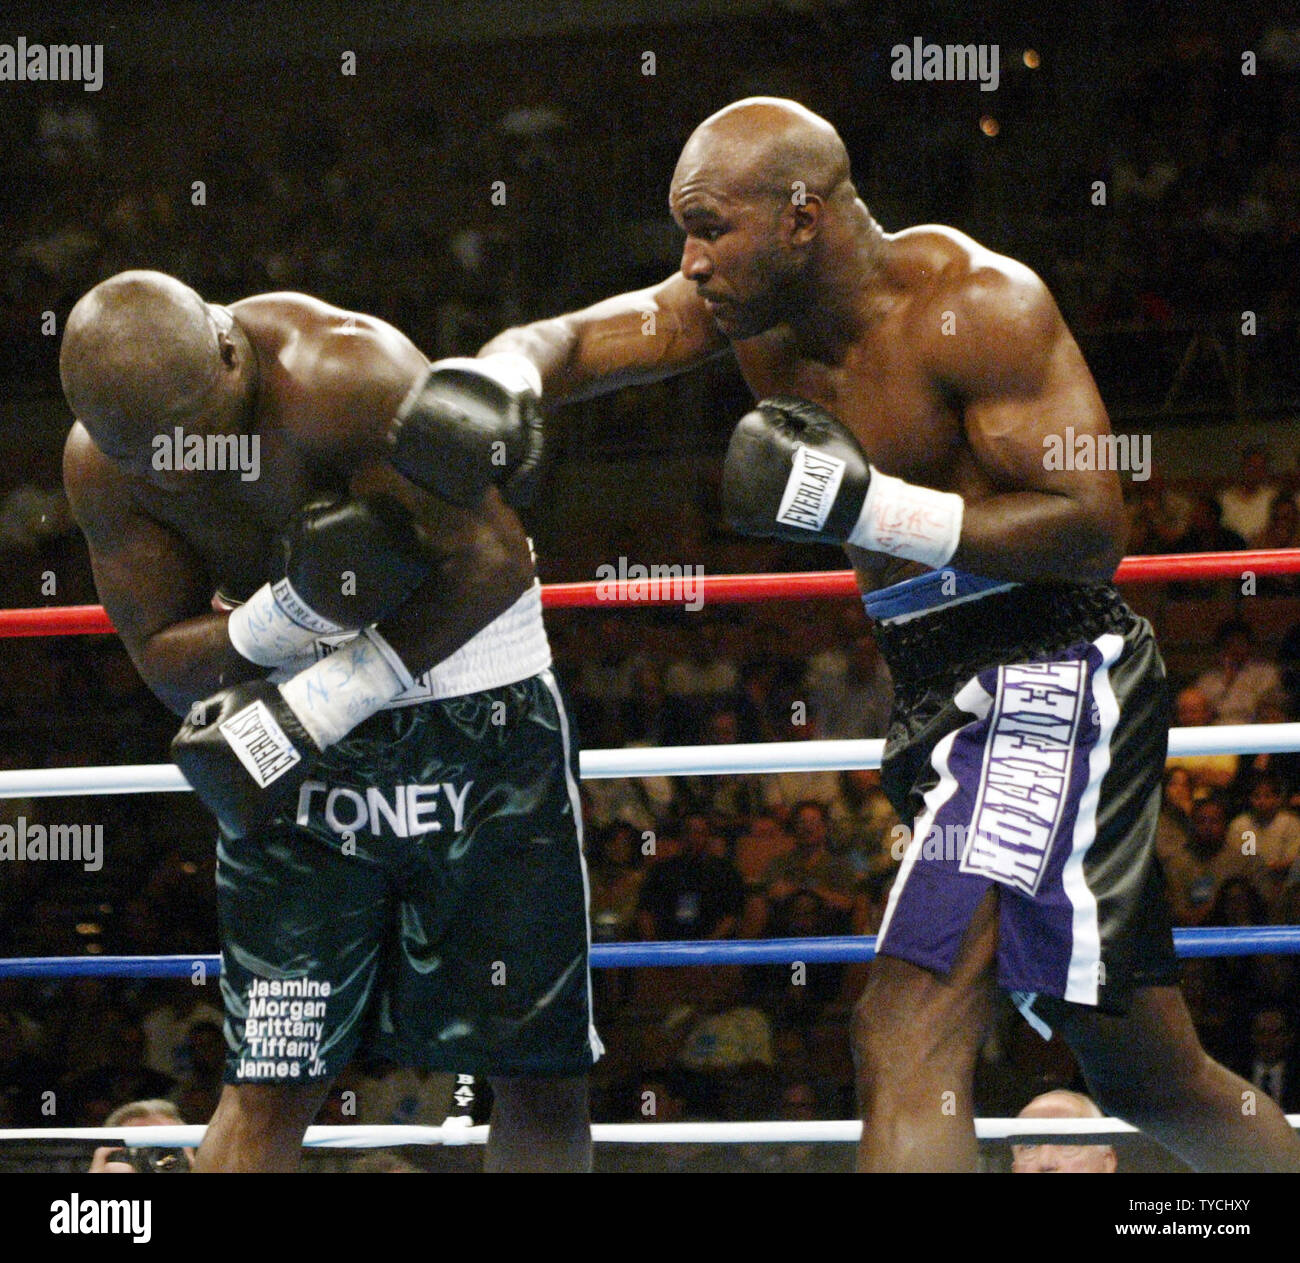 Cruiserweight champion James Toney (left) shows the angles he used throughout his fight with 4 time champion Evander Holyfield, causing the ex champion to miss and created the frustration that ultimately wound up in a 9th round TKO by Toney at Mandalay Bay, in Las Vegas, Nevada on October 4, 2003. (UPI/ROGER WILLIAMS) Stock Photo